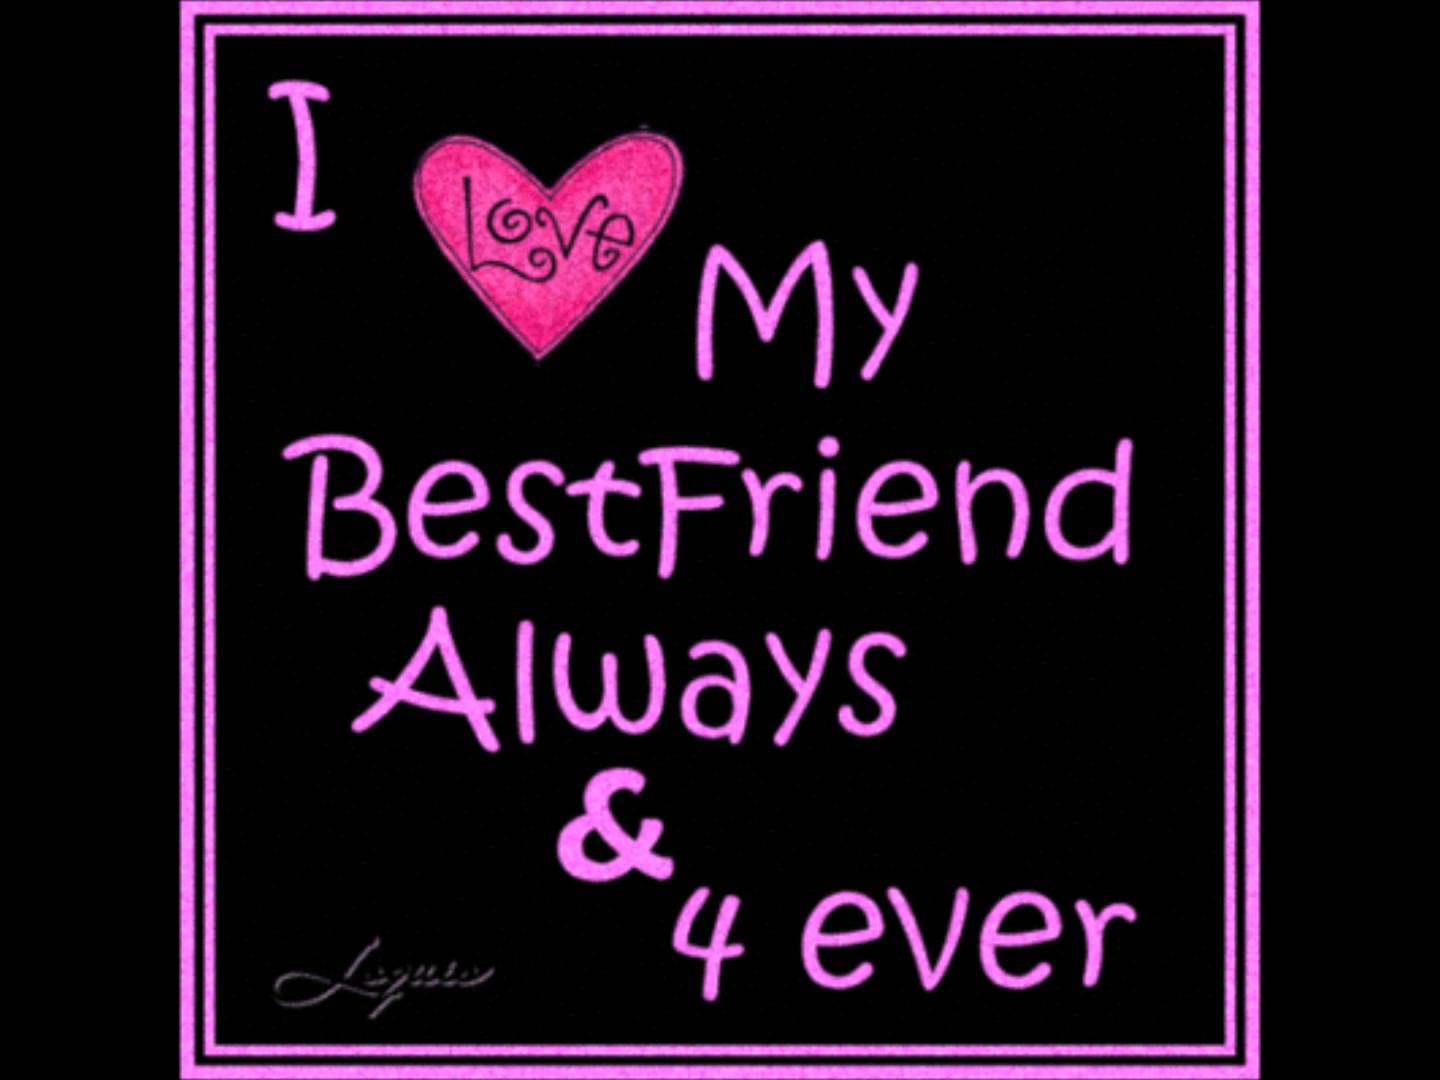 Friends ever. BFF. Friendship never ends. Forever friends Forever you and me Forever ever and always will be.